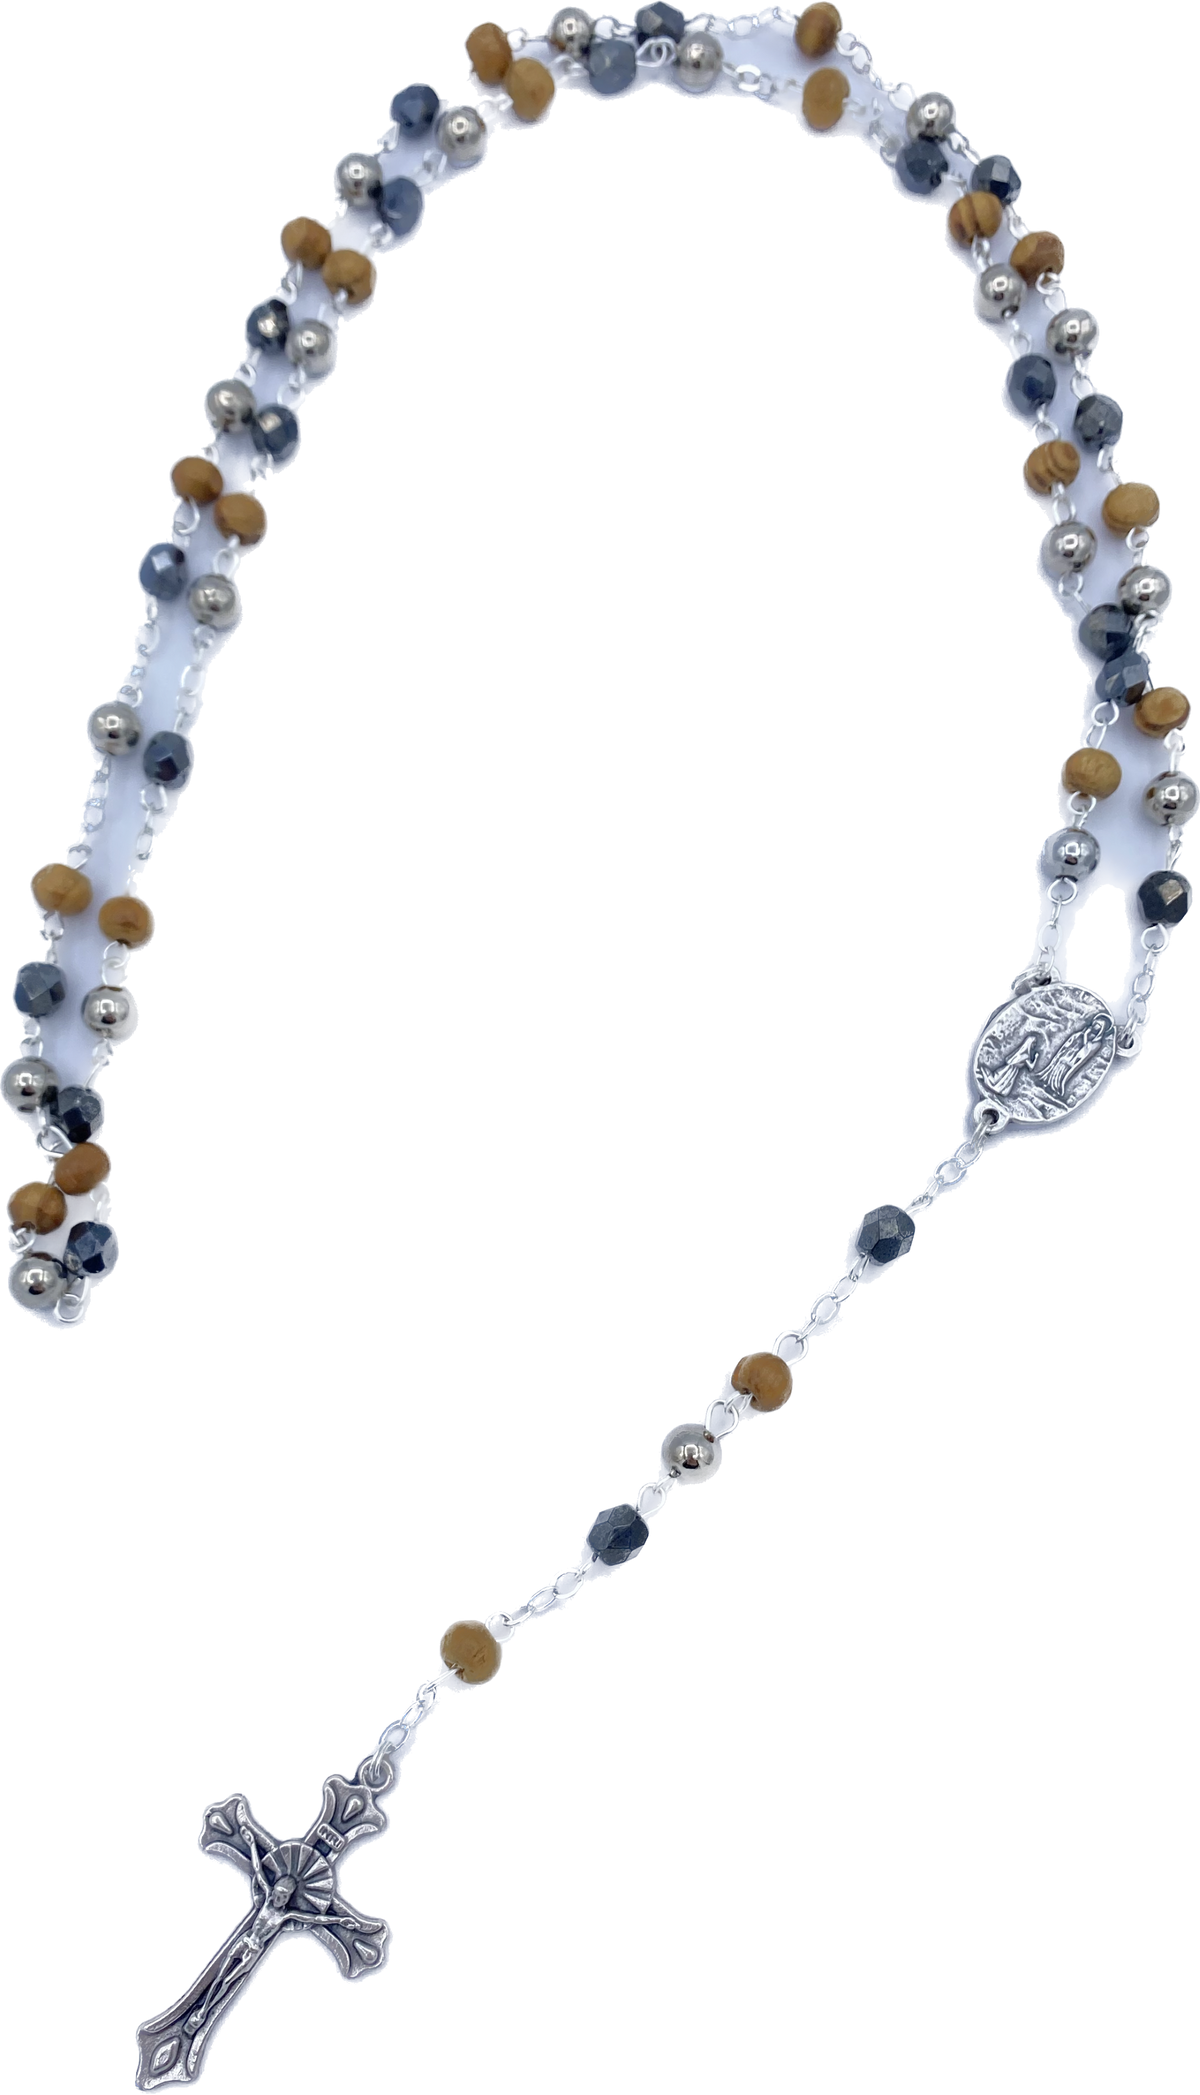 Wood/crystal rosary on chain